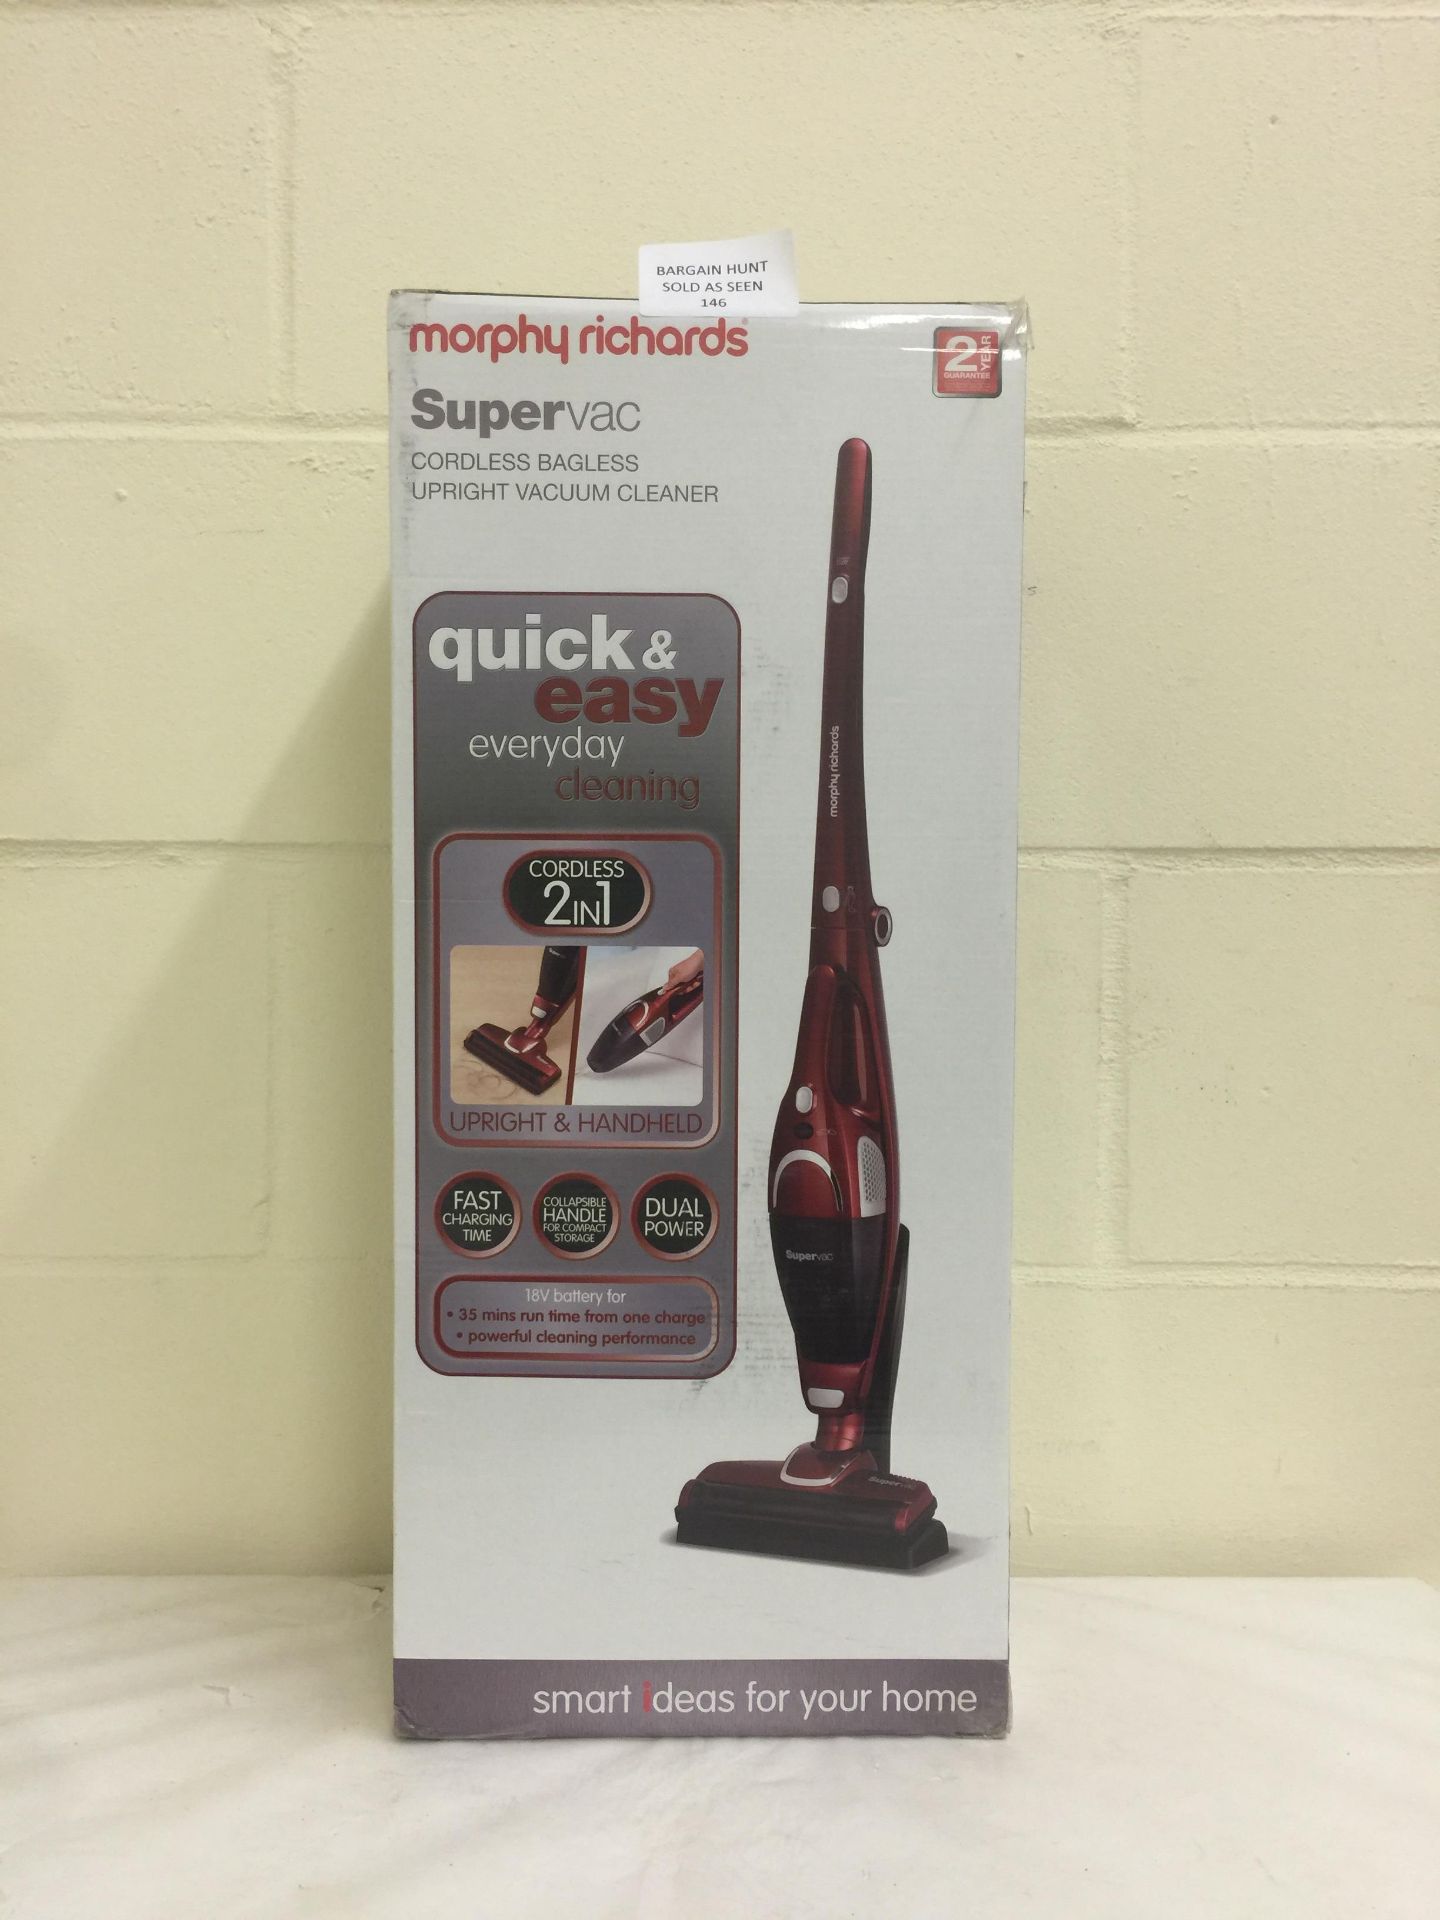 Morphy Richards Supervac Everday Vacuum Cleaner